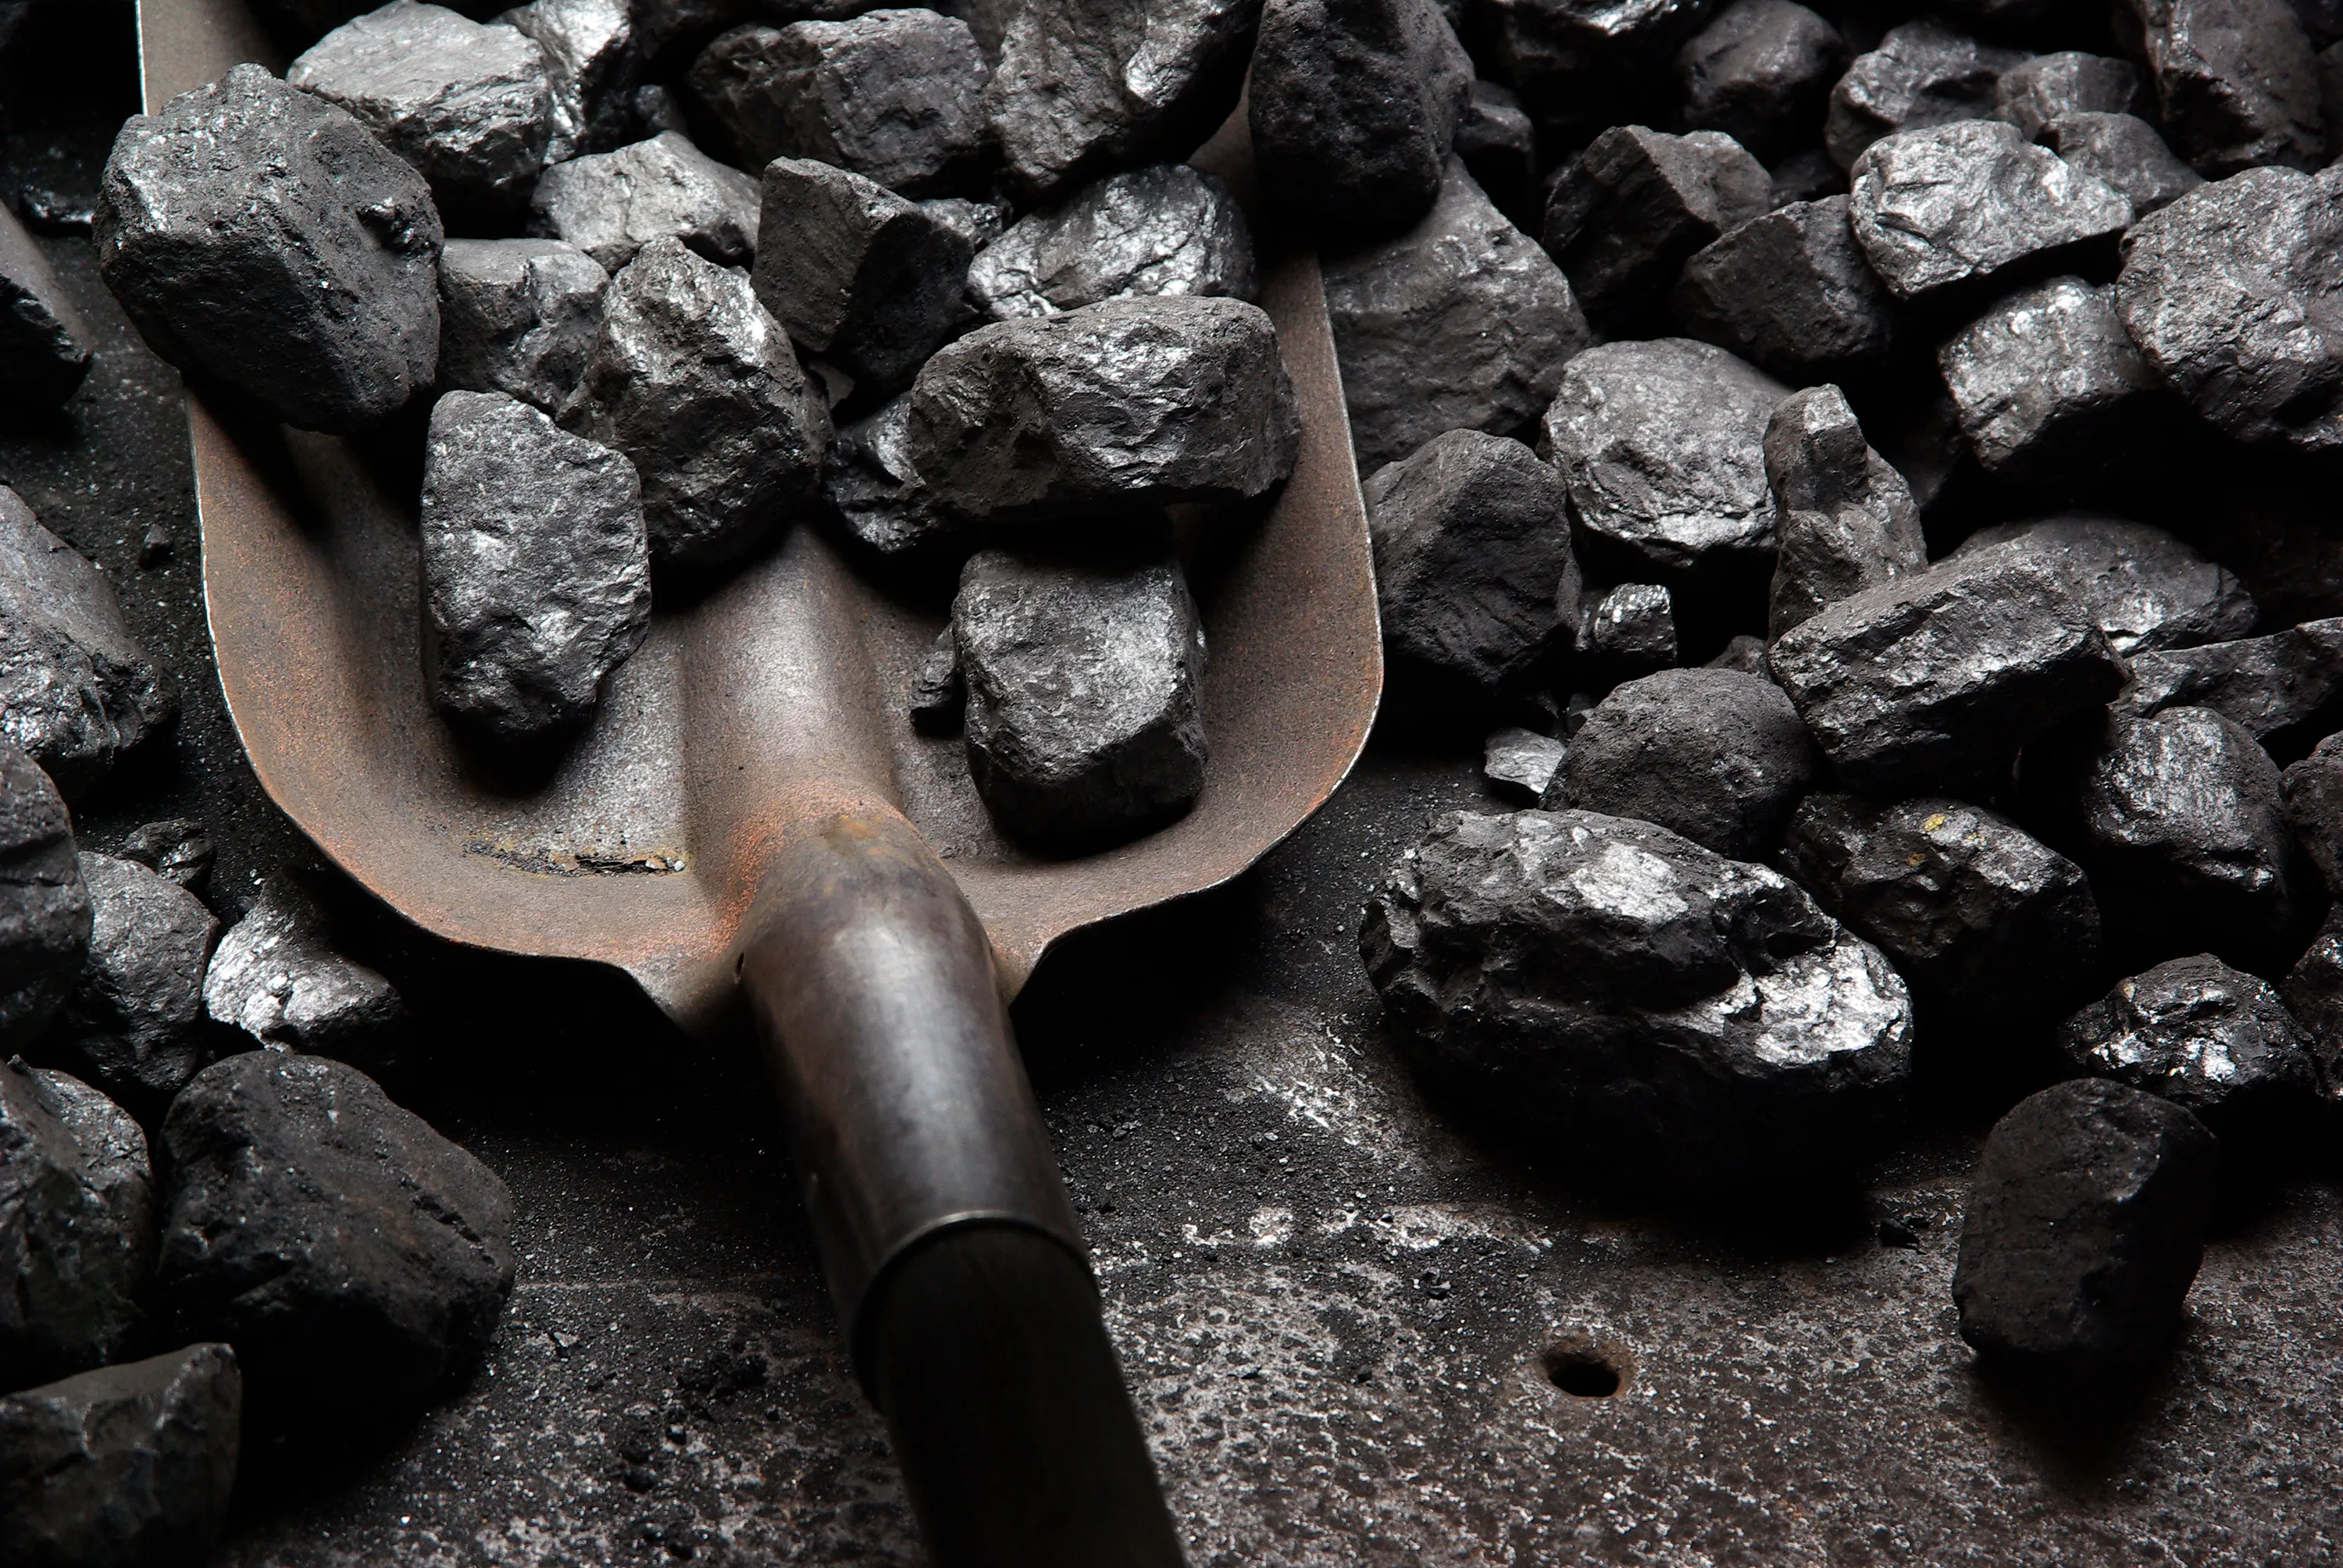 Shovel containing and surrounded by pieces of coal